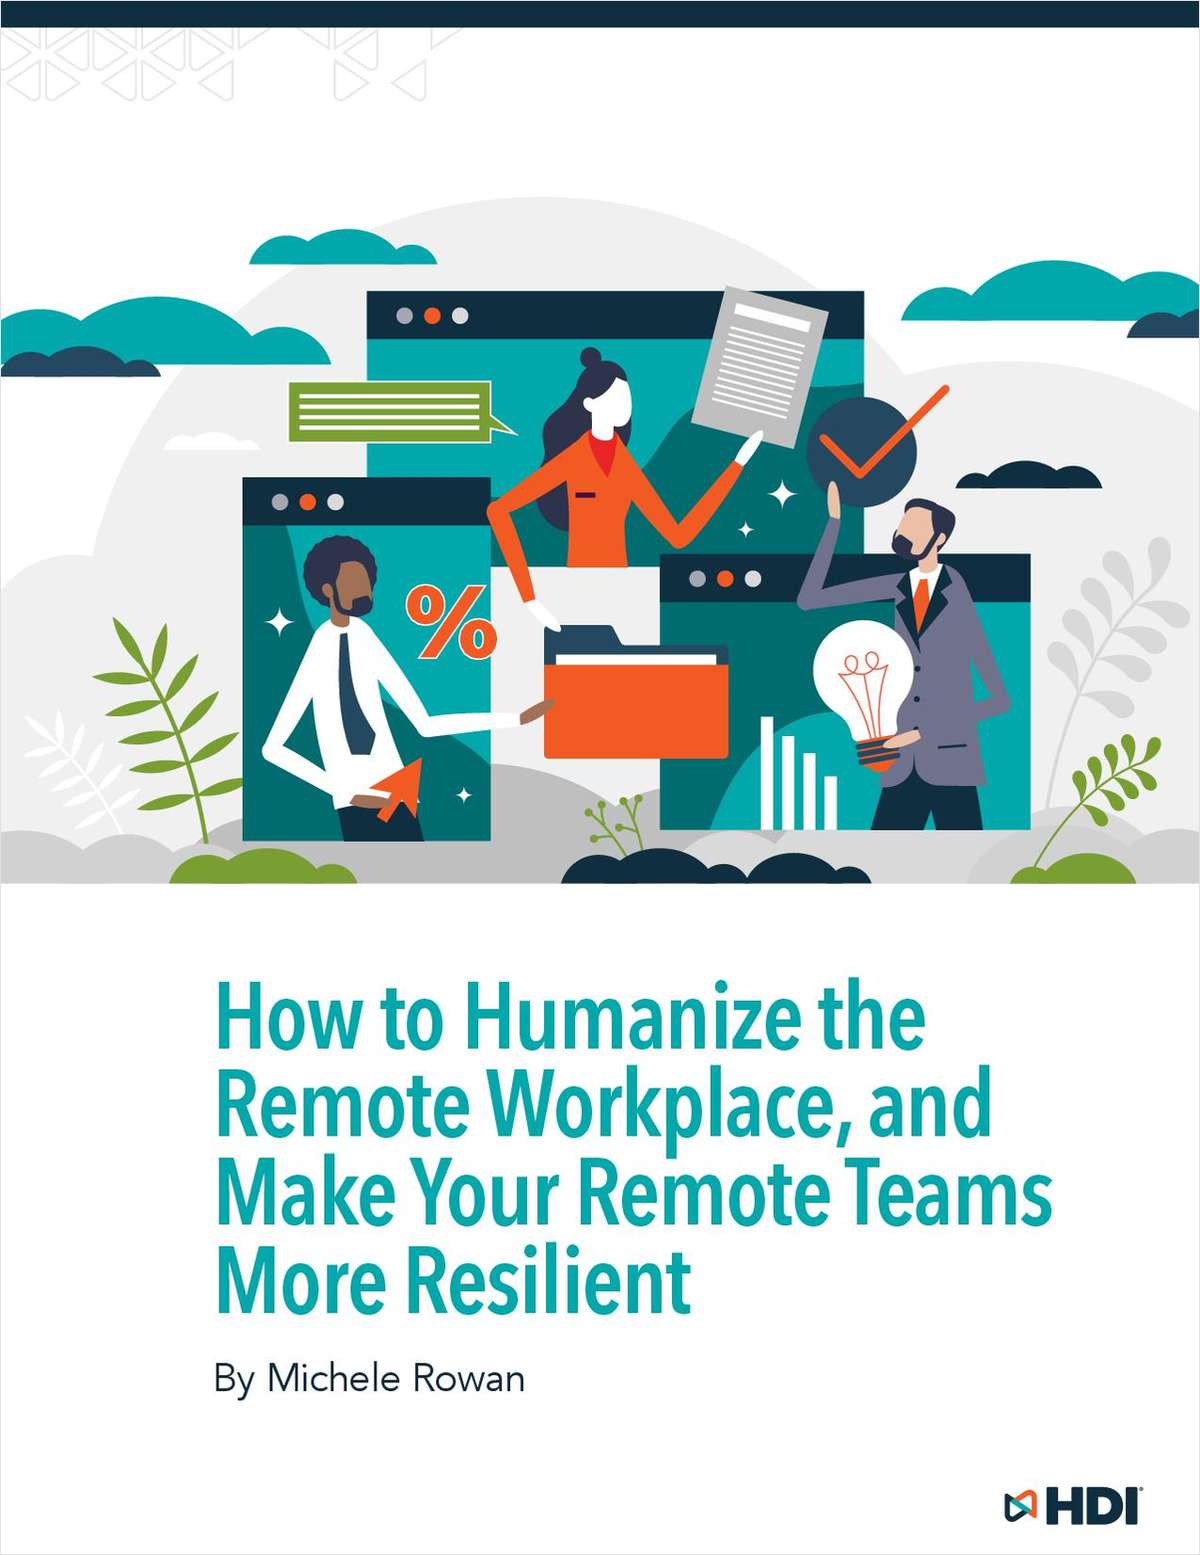 How to Humanize the Remote Workplace, and Make Your Remote Teams More Resilient